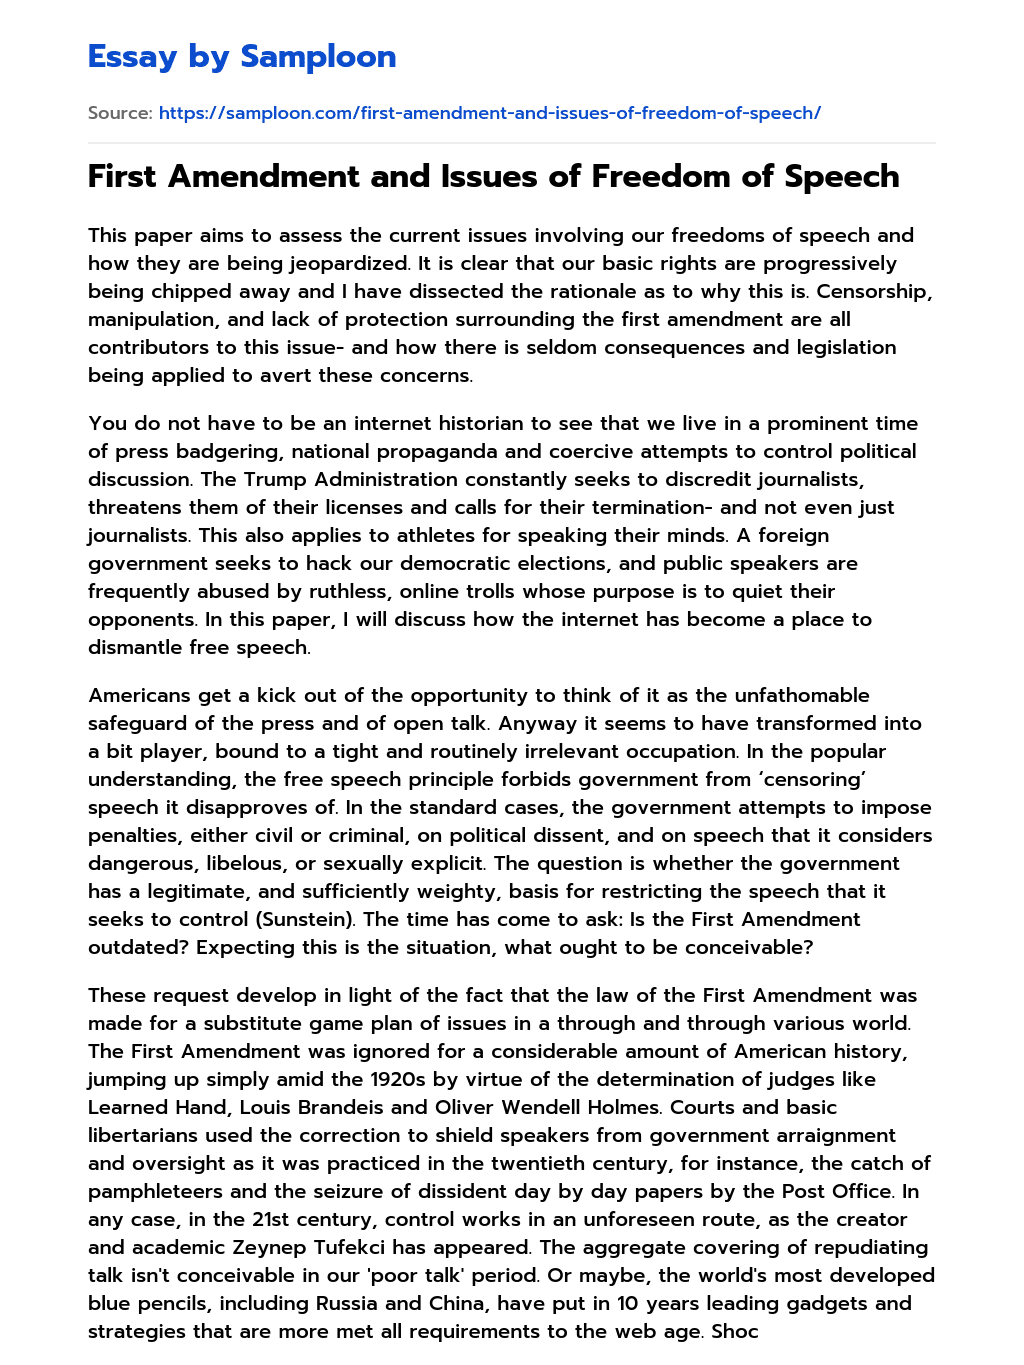 First Amendment and Issues of Freedom of Speech essay